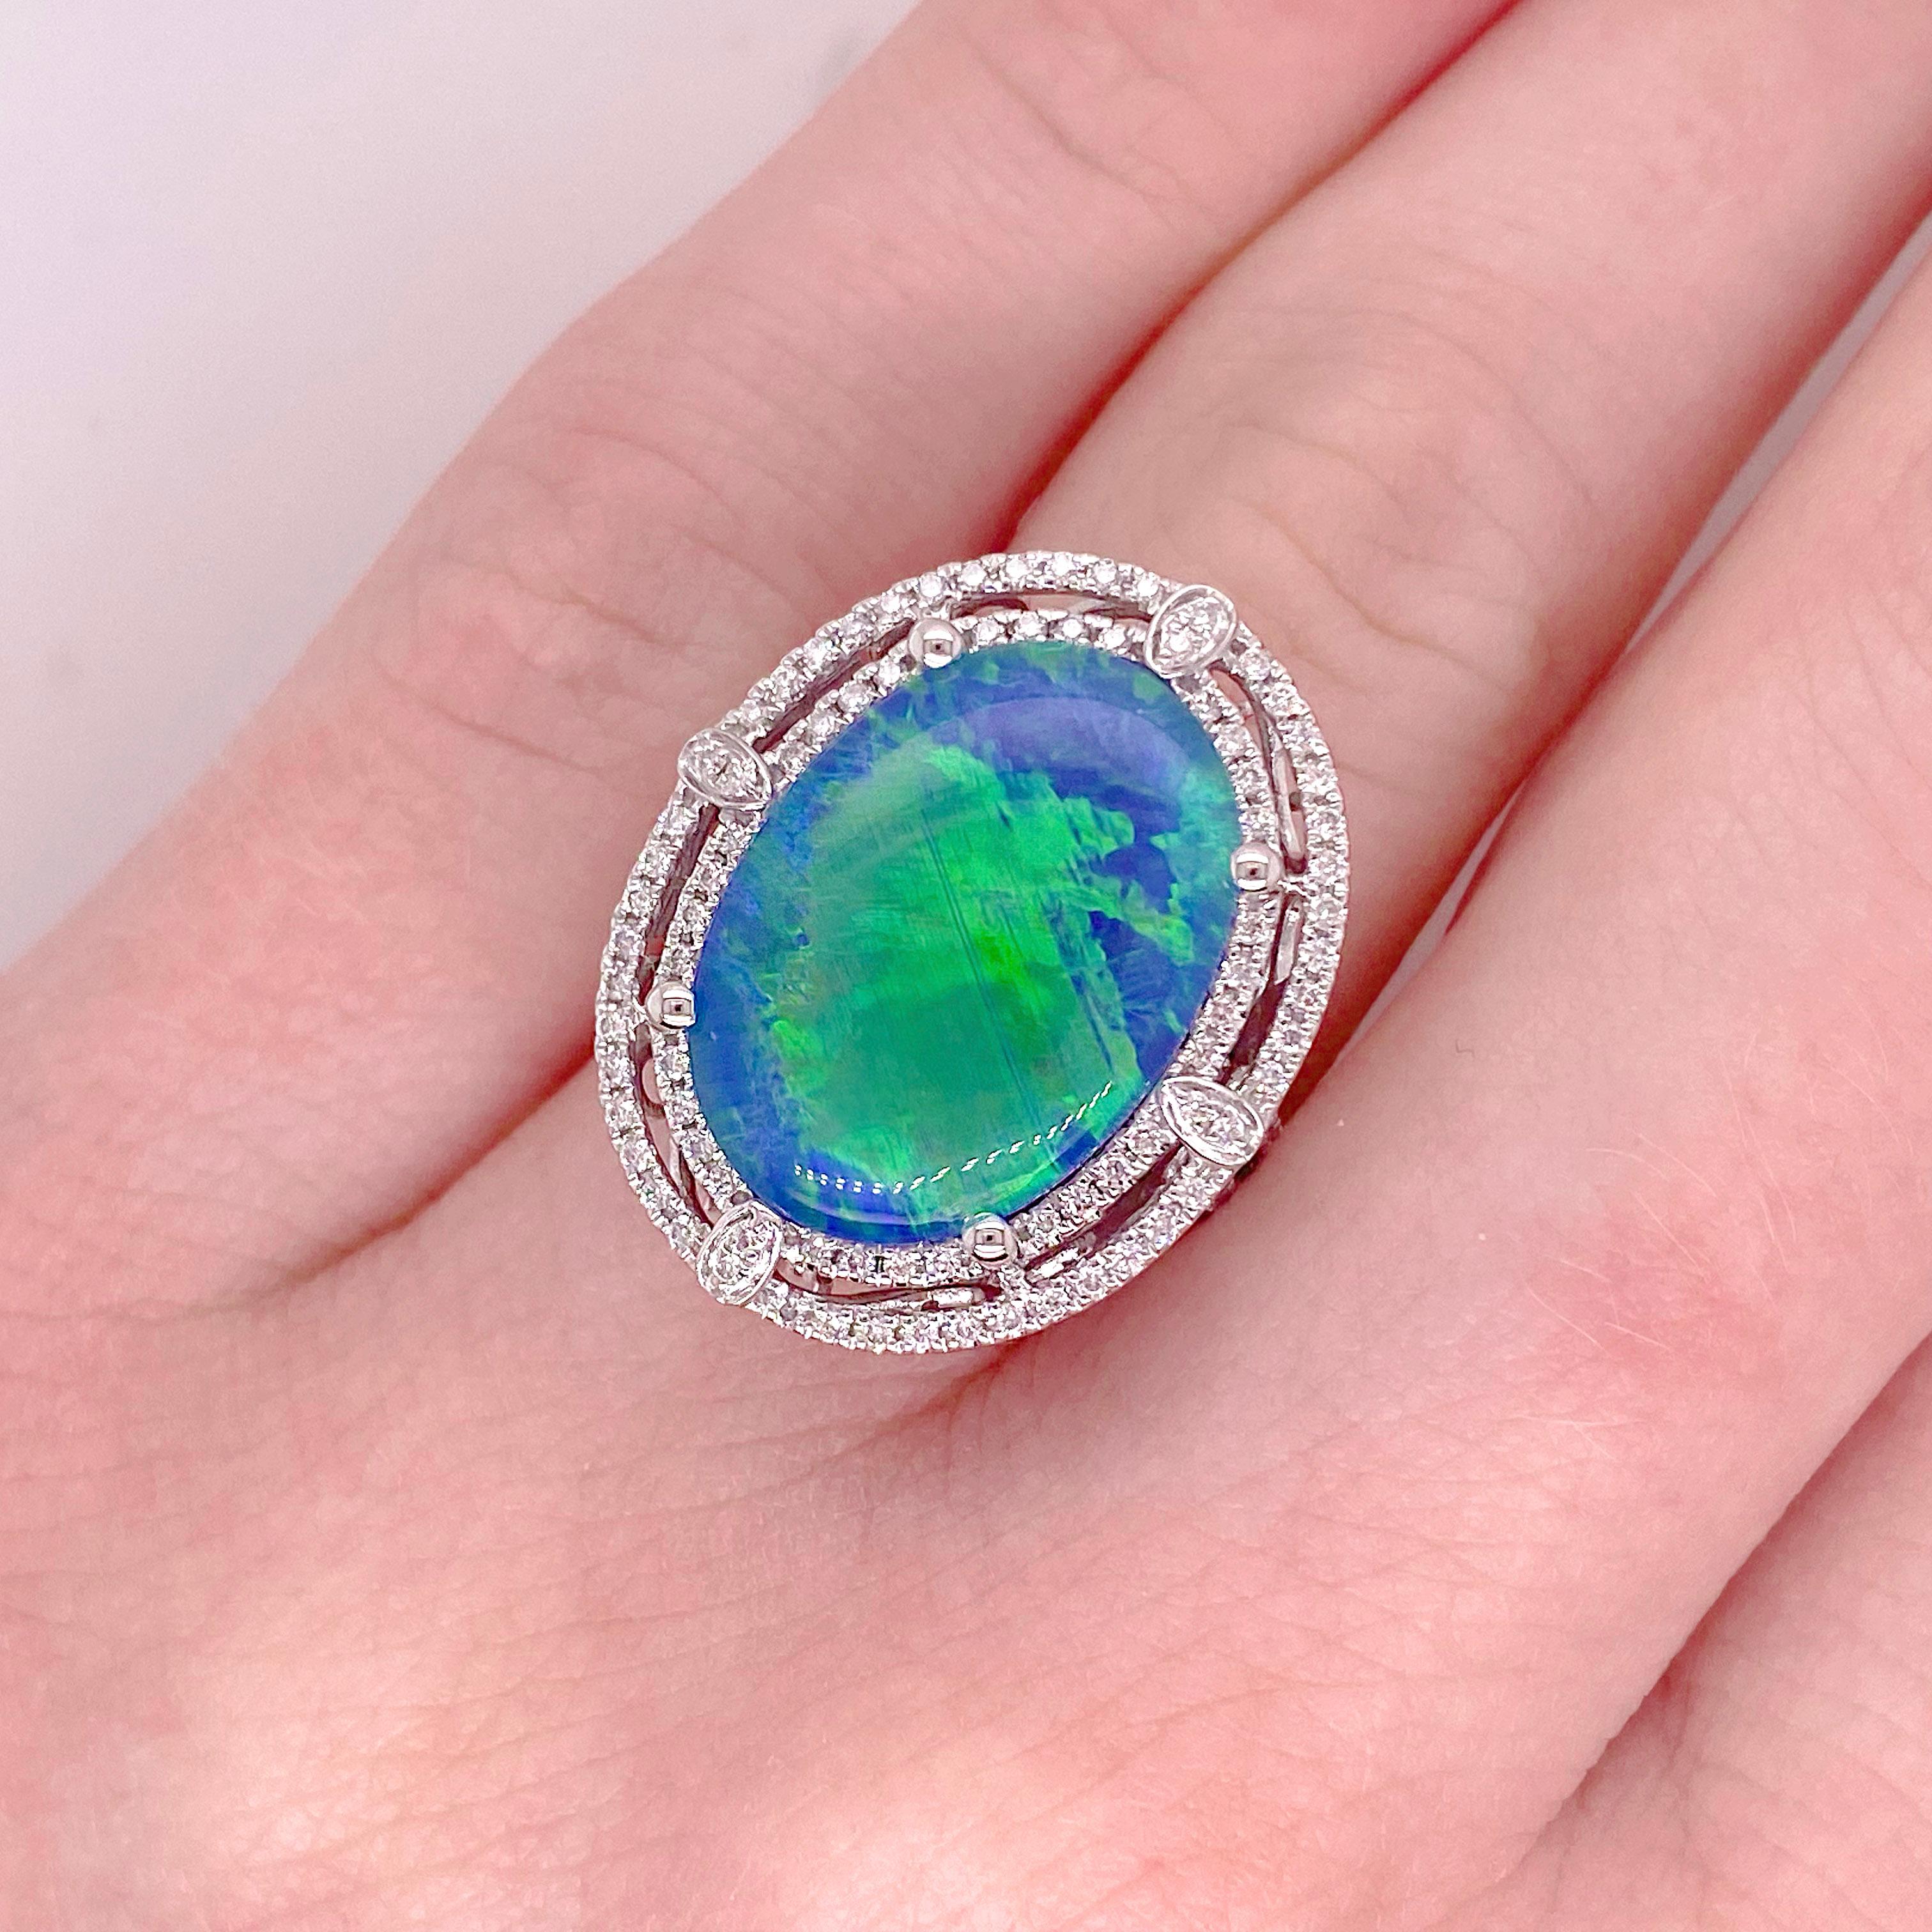 For Sale:  Original Black Opal Ring with Diamond Halo 14k White Gold 6.85 Carats Sizable 4